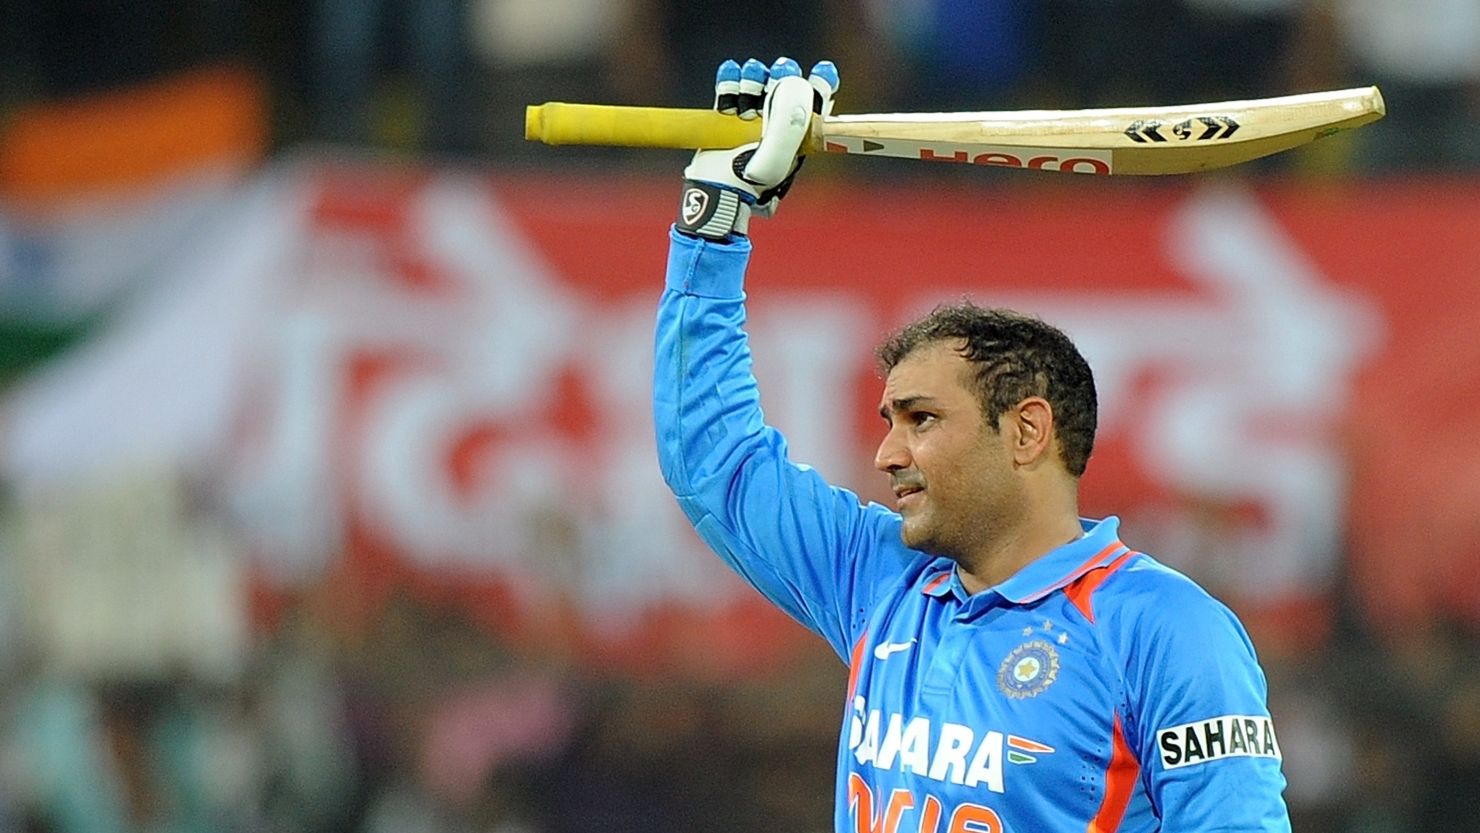 Virender Sehwag celebrates his record double hundred in the one-day international against West Indies.